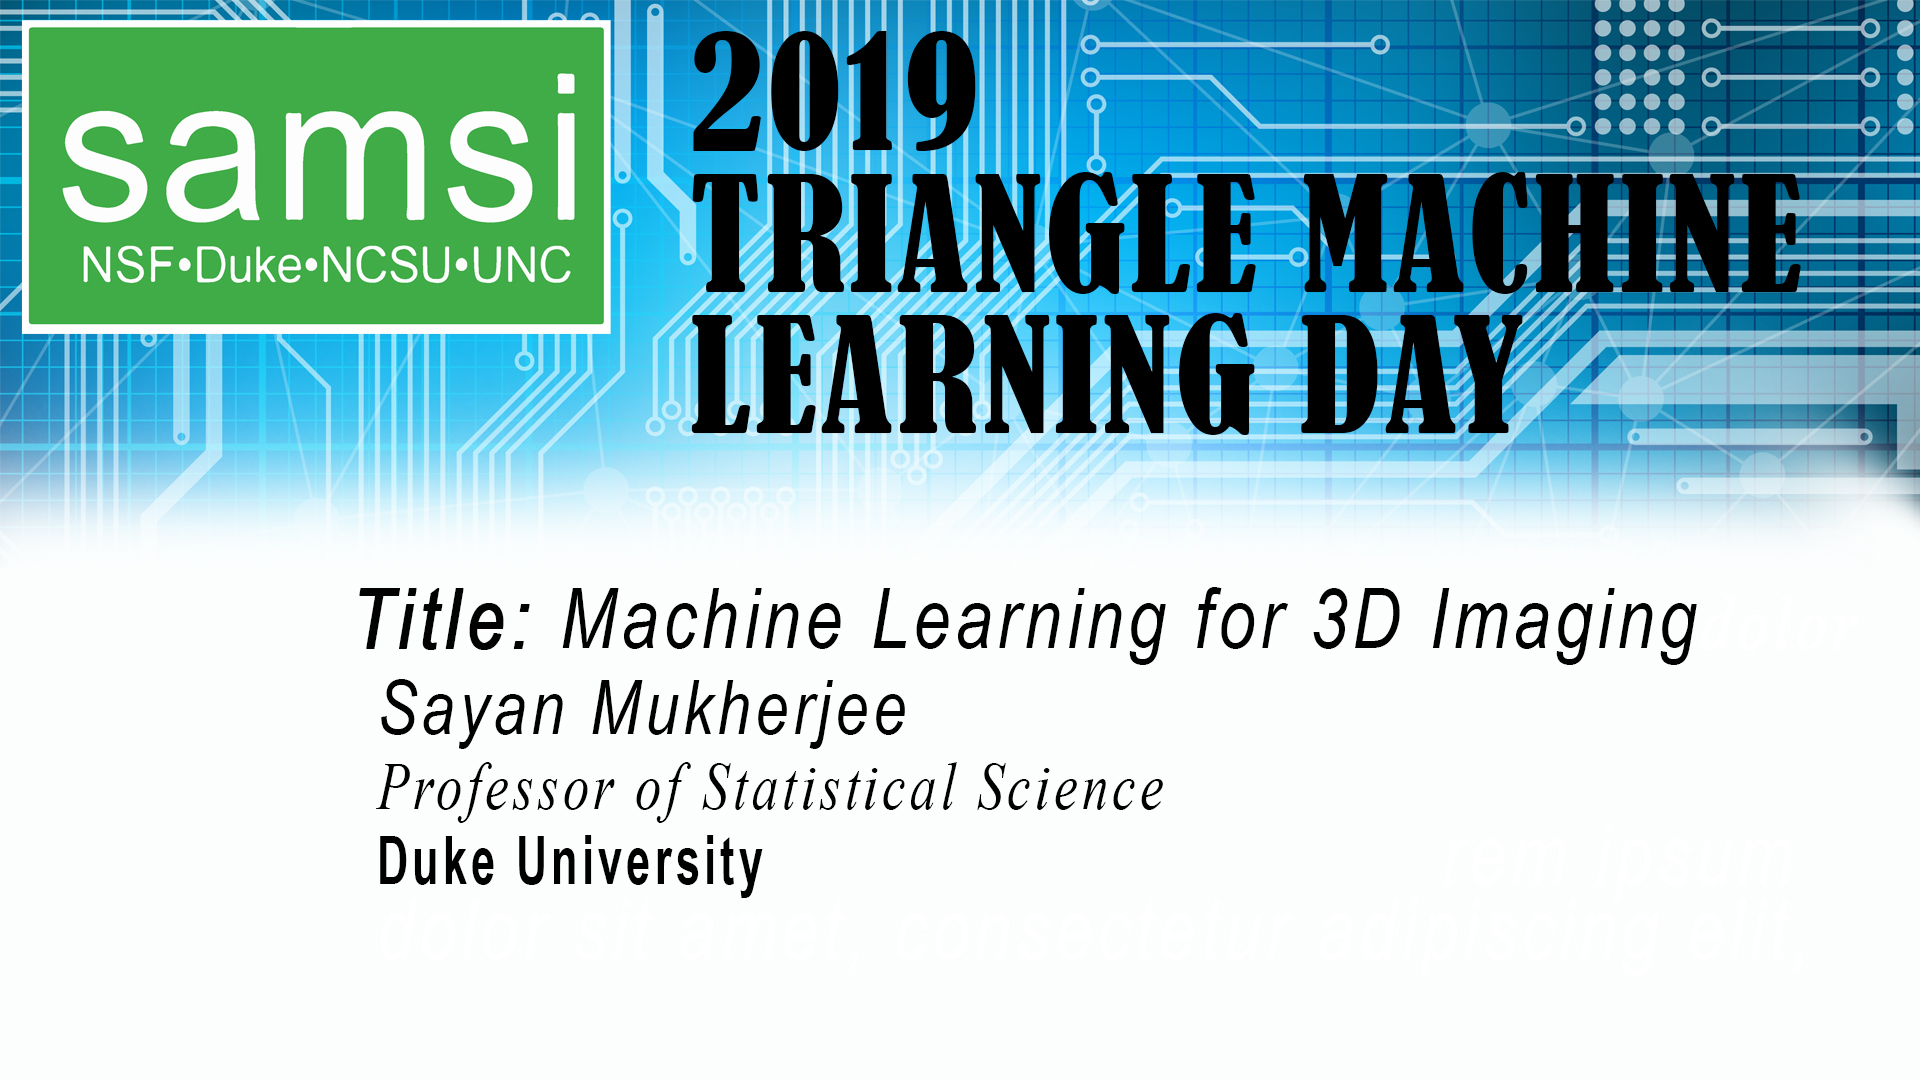 Deep Learning: Triangle Machine Learning Day - Machine Learning for 3D Imaging, Sayan Mukherjee Thumbnail